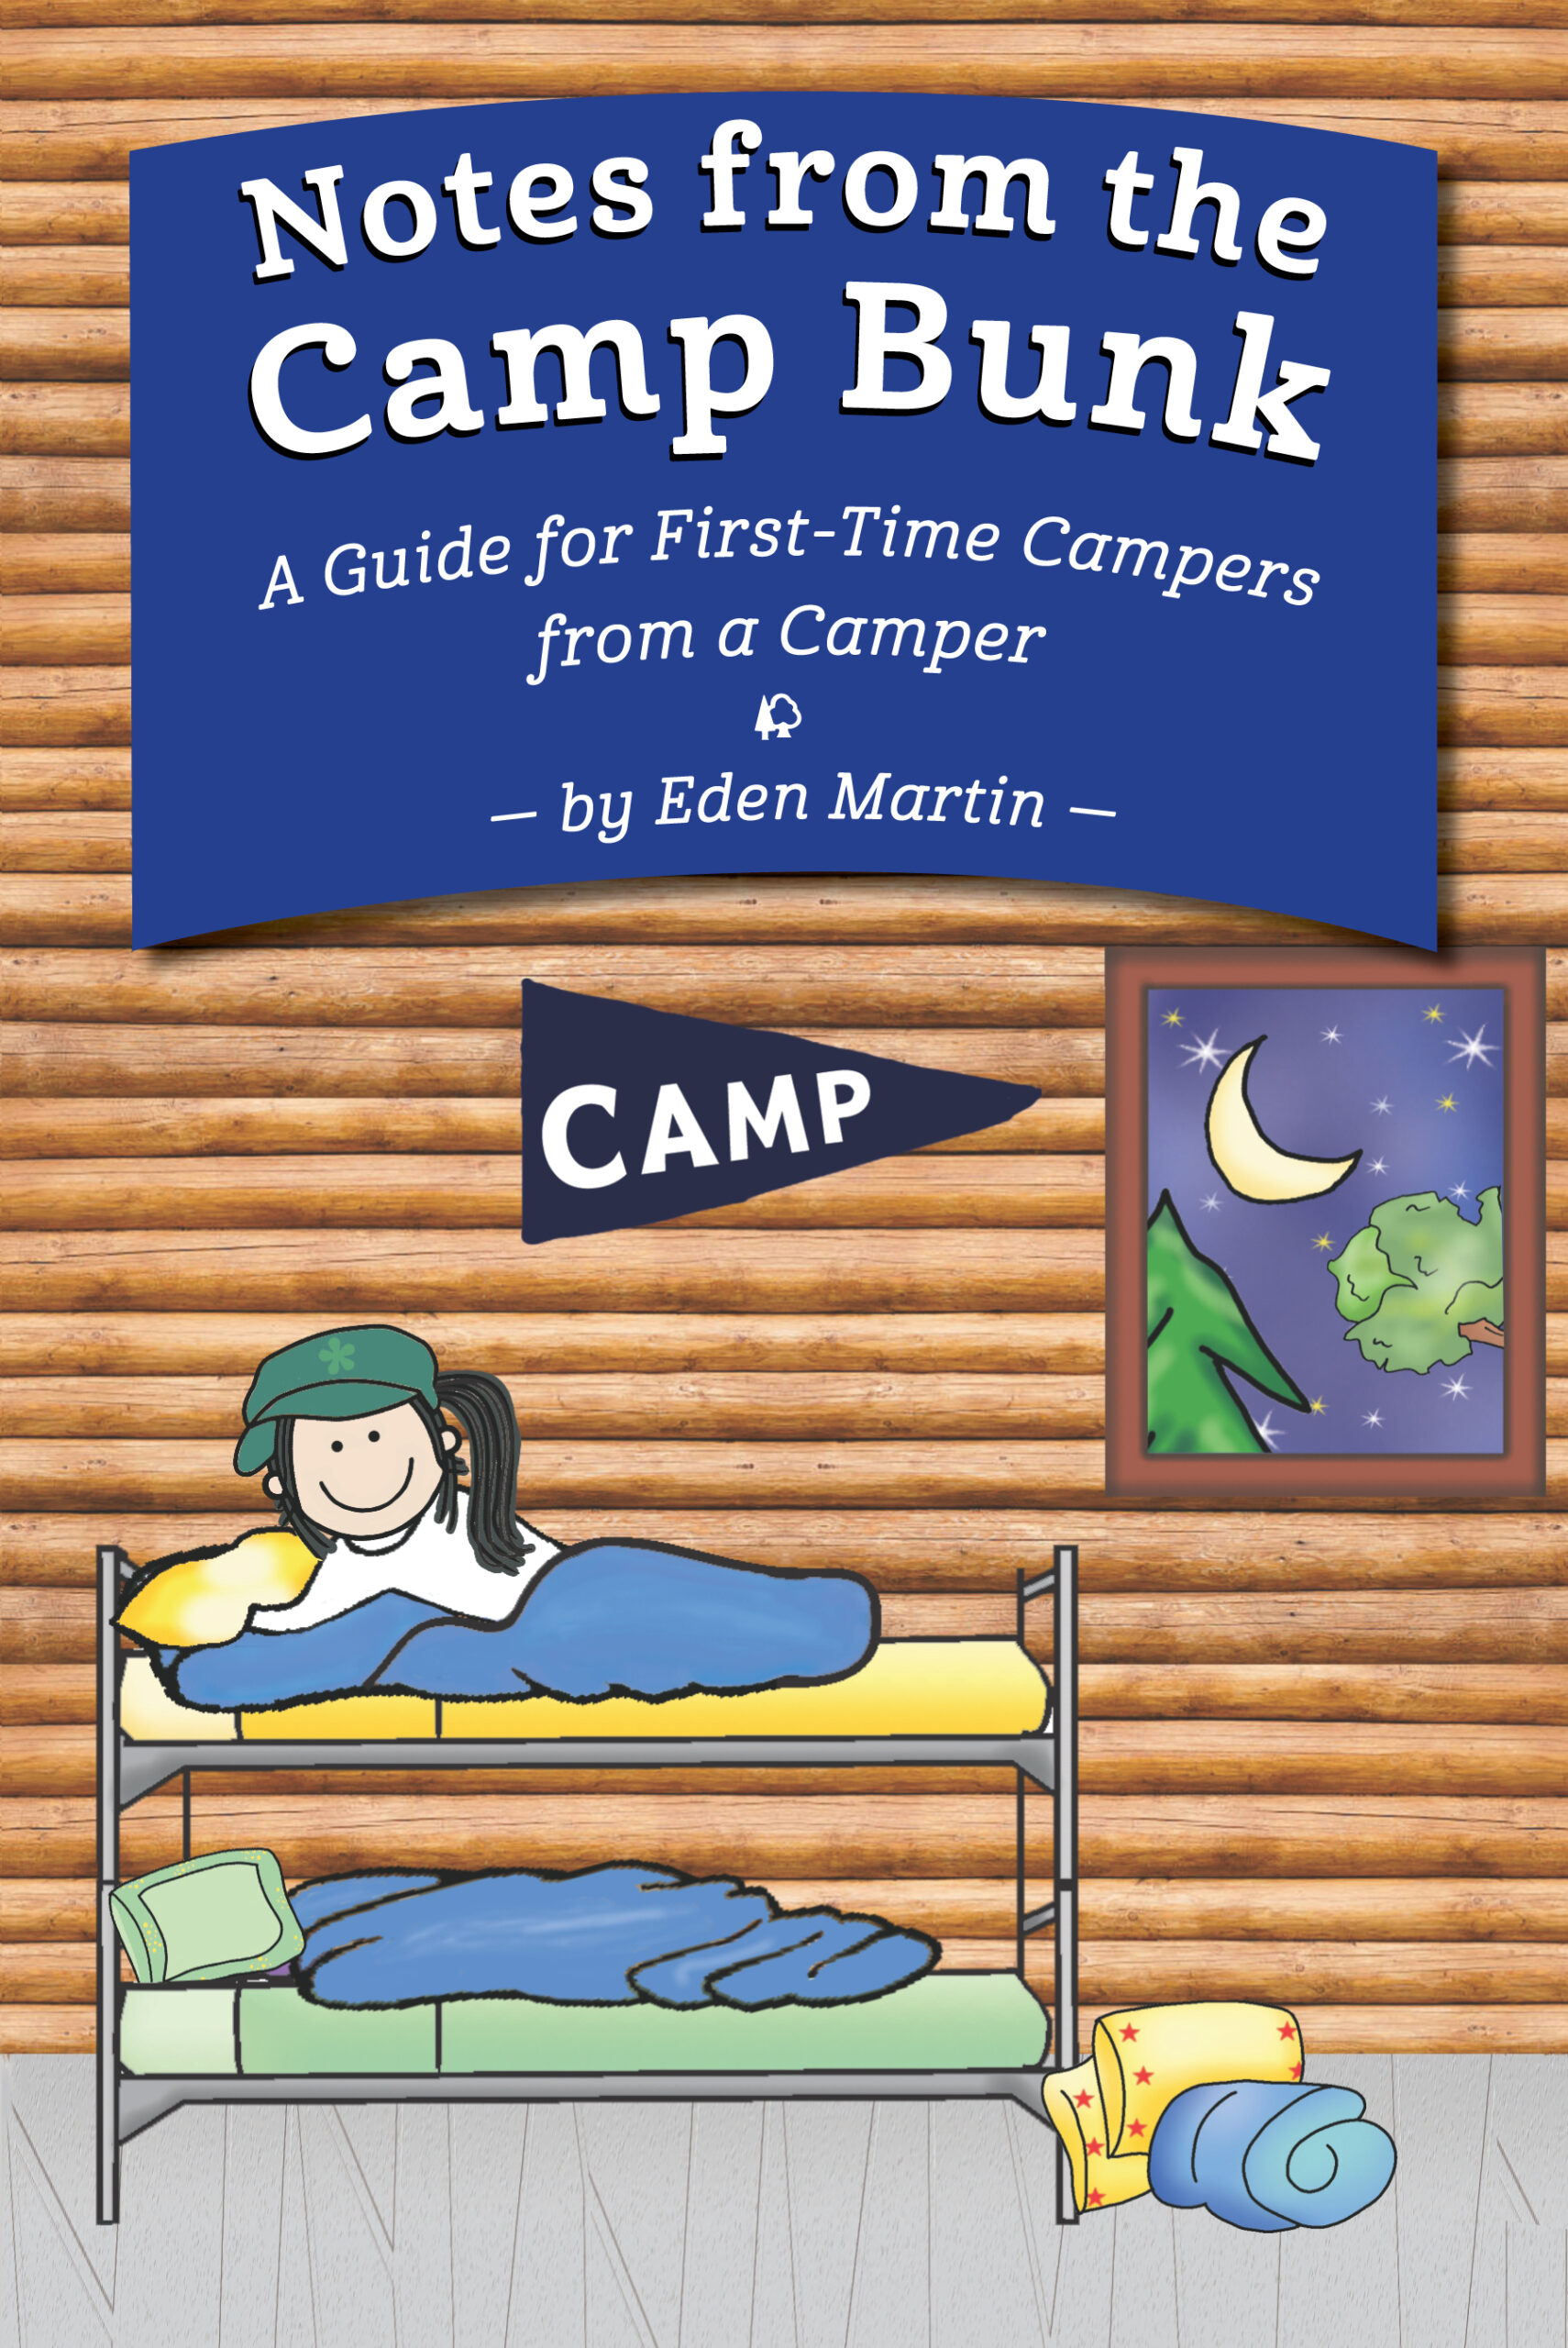 Notes from the Camp Bunk by Eden Martin